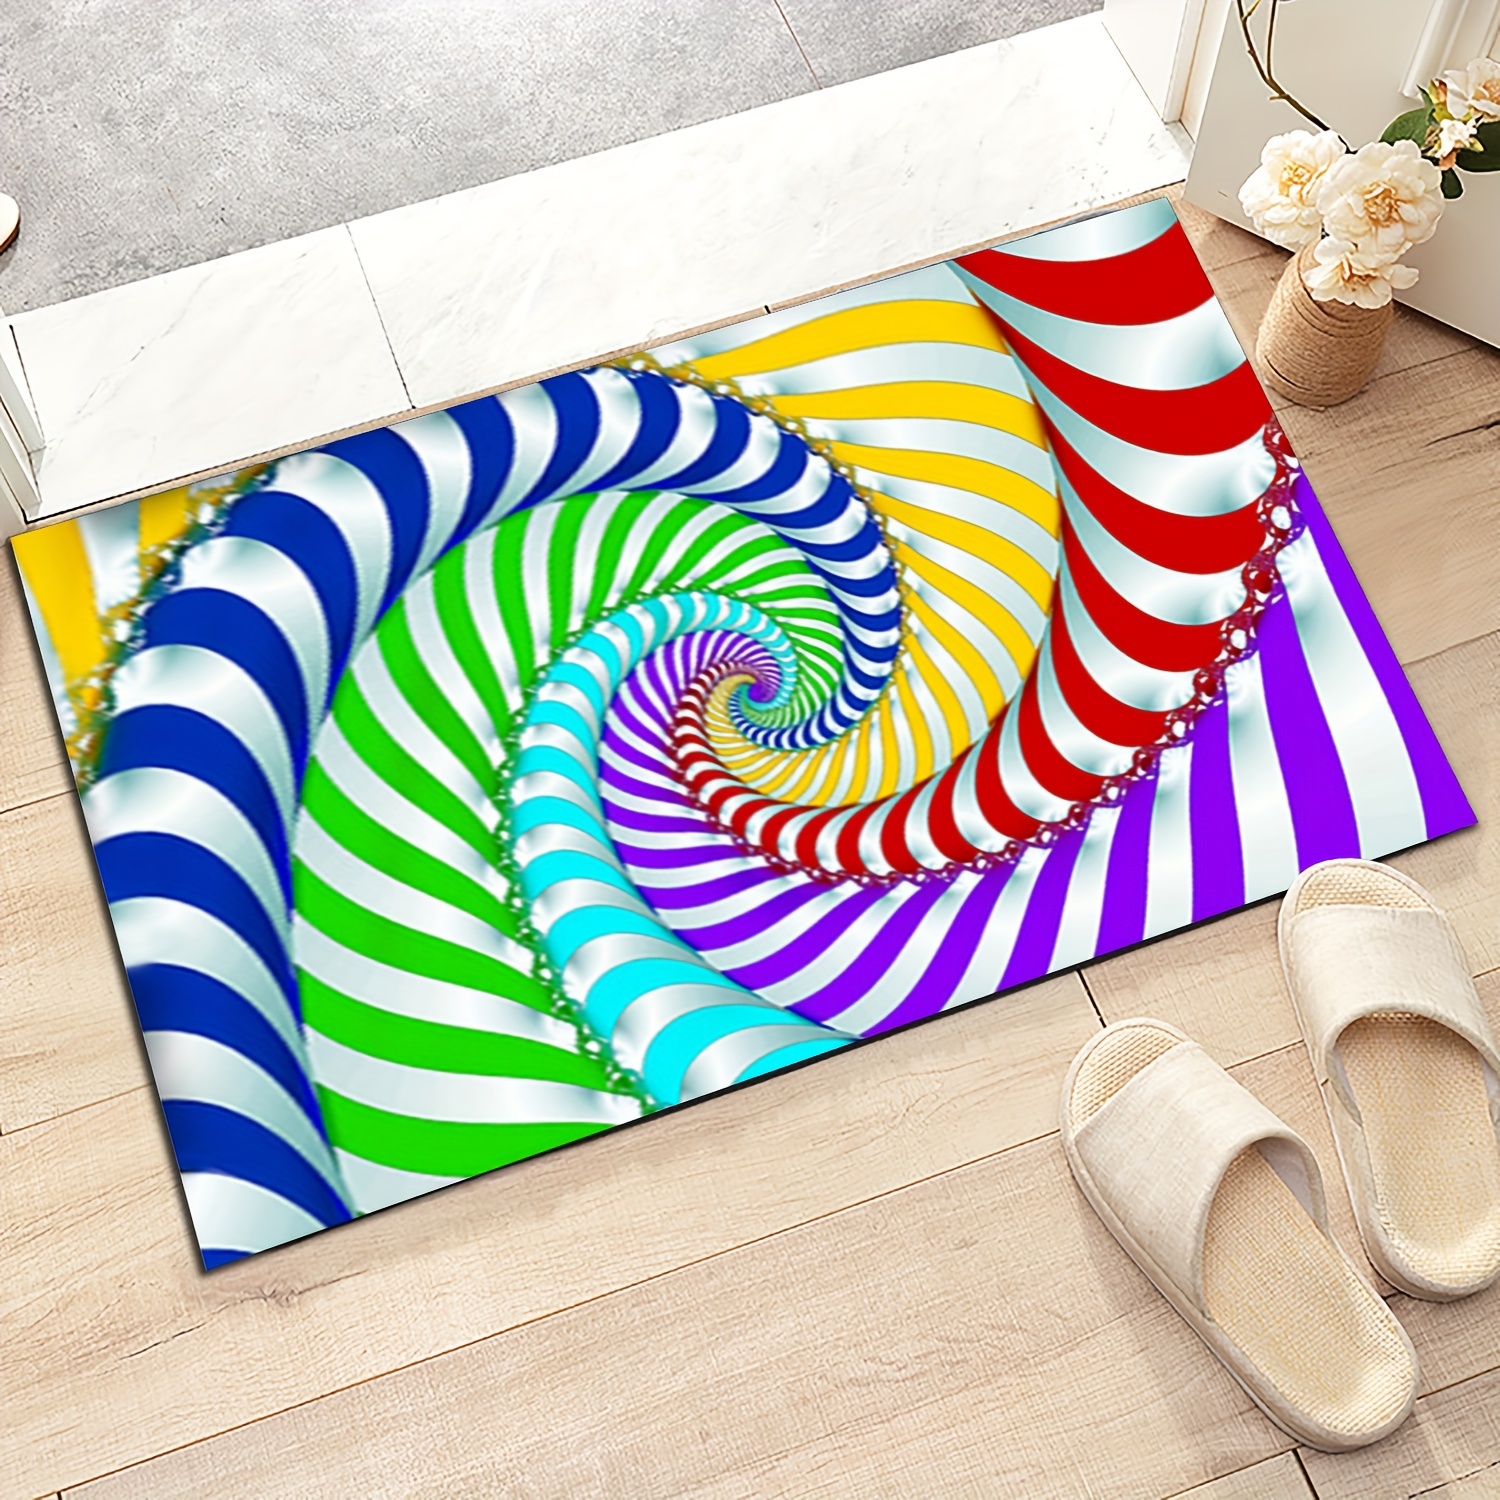 3D Bottomless Hole Optical Illusion Area Rug Carpet for Living Room Swirl  Round Grid 3D Illusion